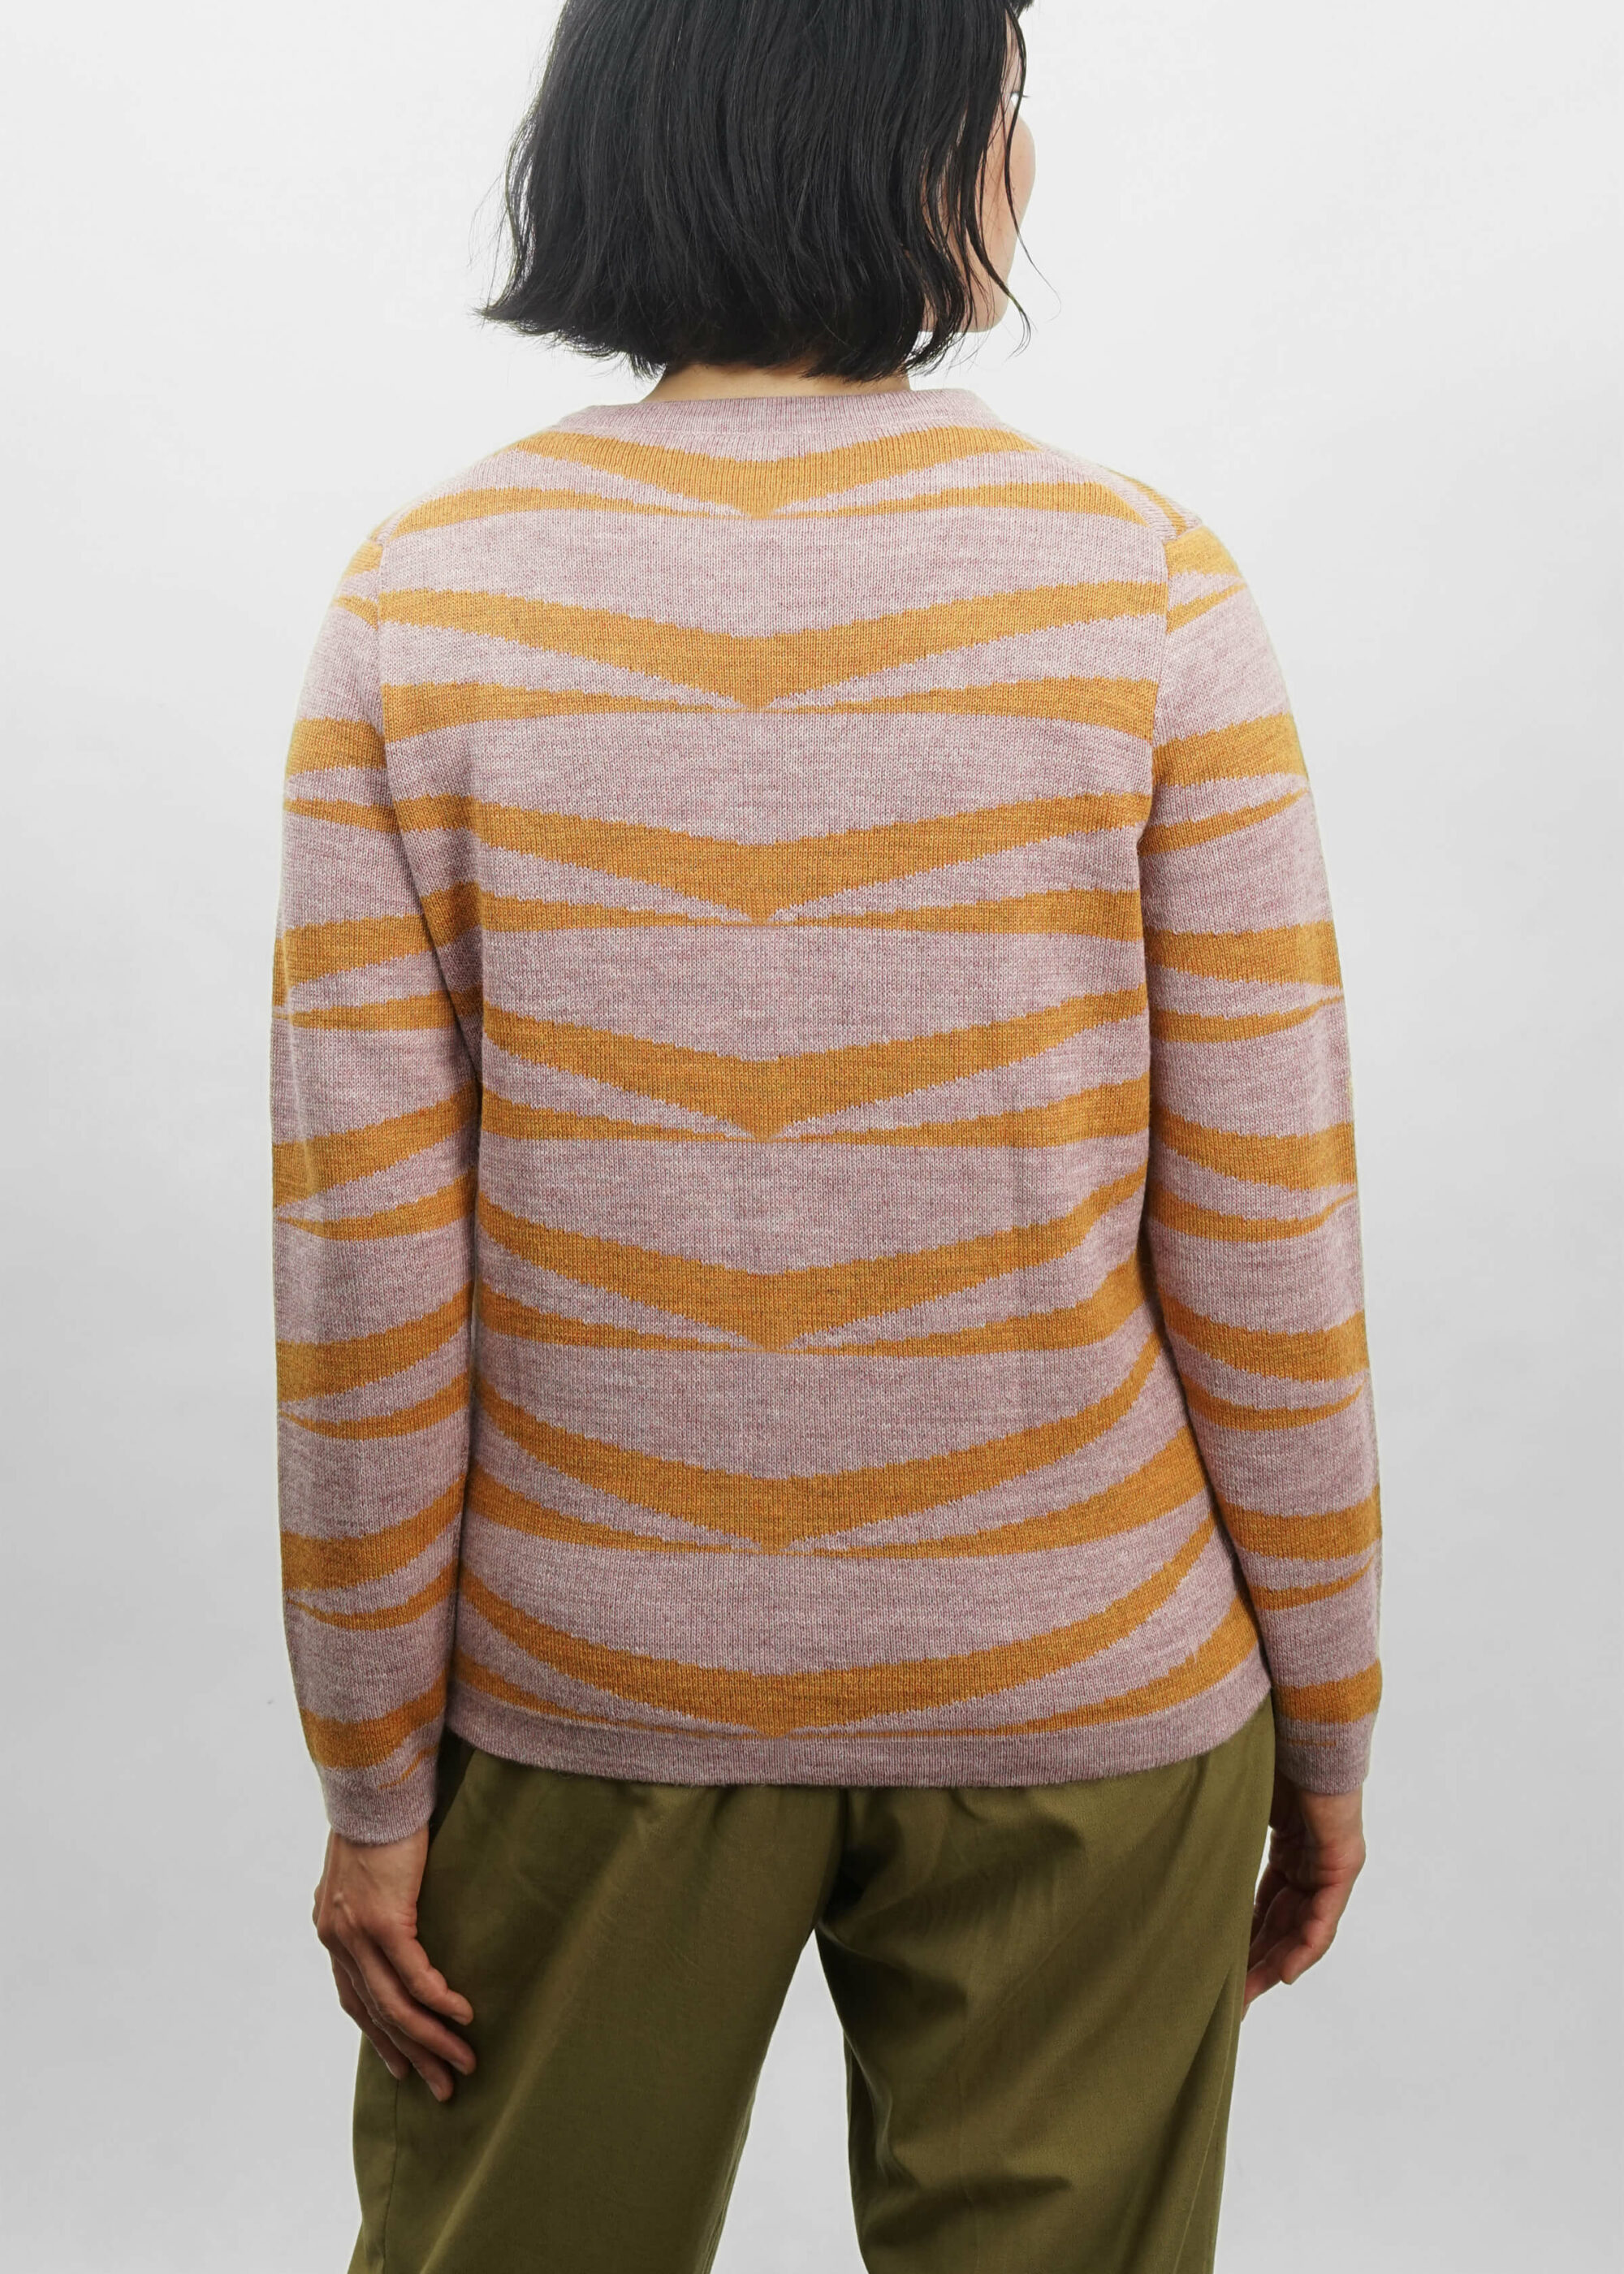 Product image for »Inti« Pale Pink Yellow Sweater Baby Alpaca